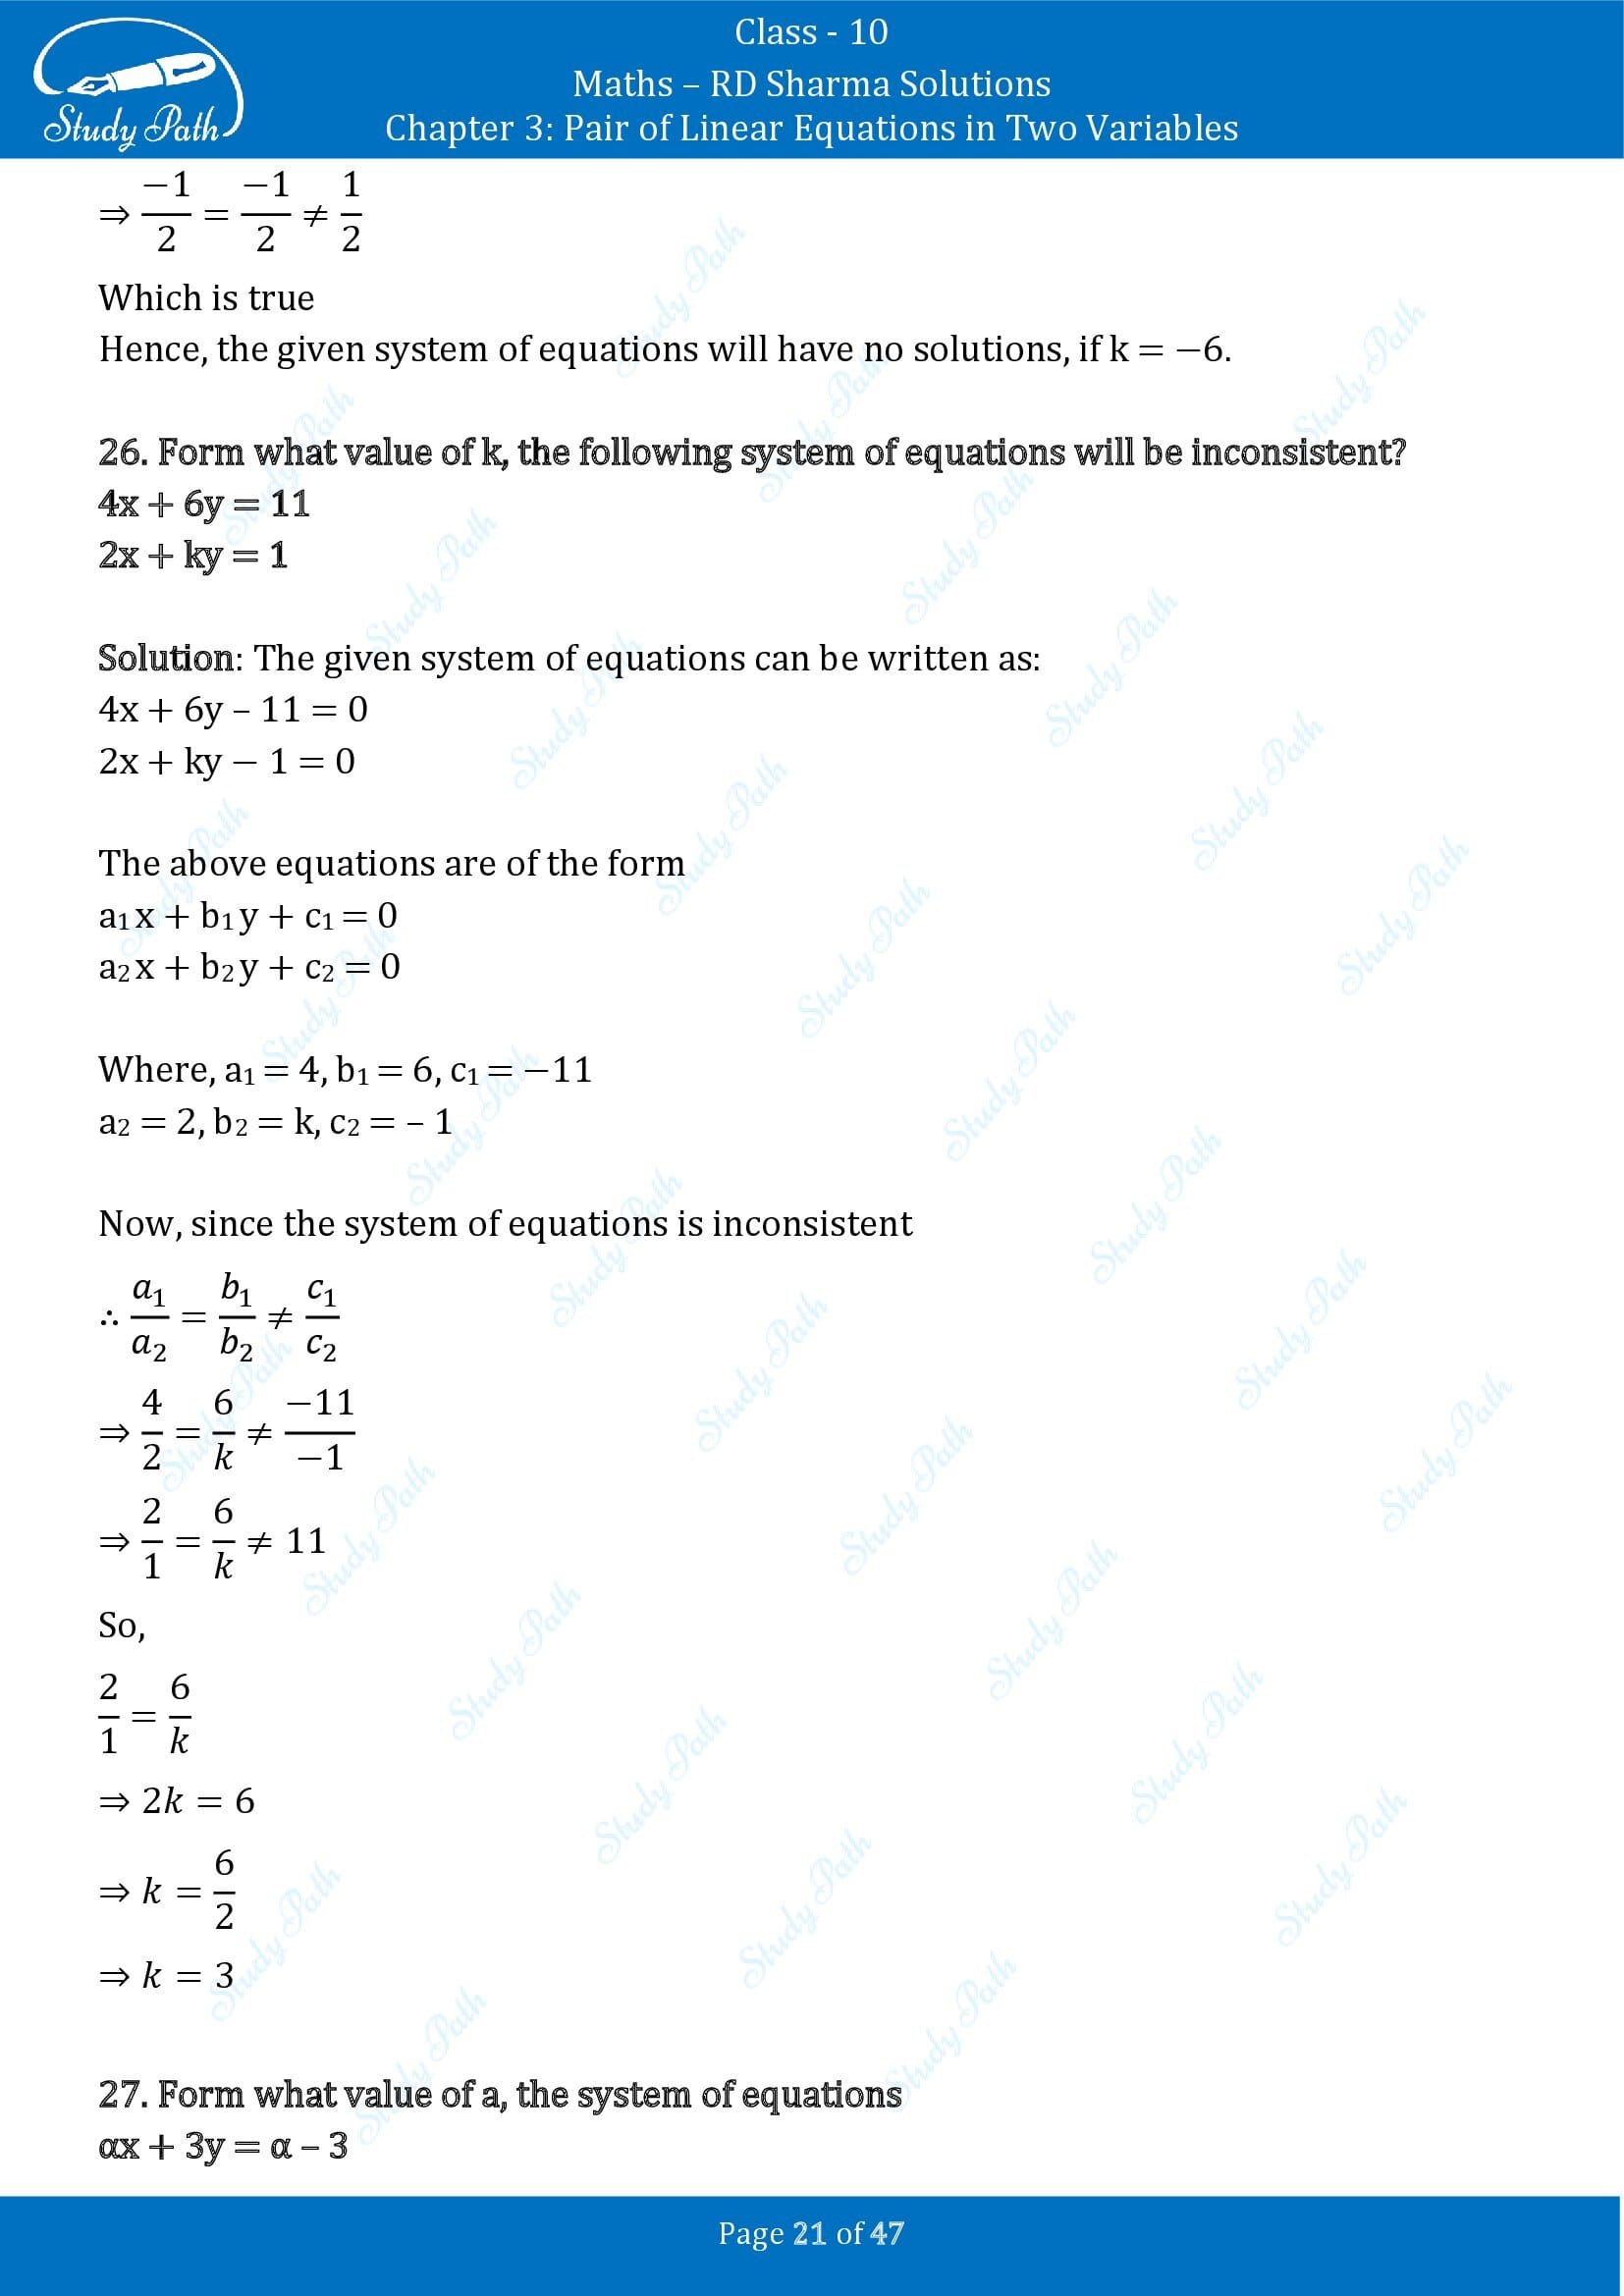 RD Sharma Solutions Class 10 Chapter 3 Pair of Linear Equations in Two Variables Exercise 3.5 00021